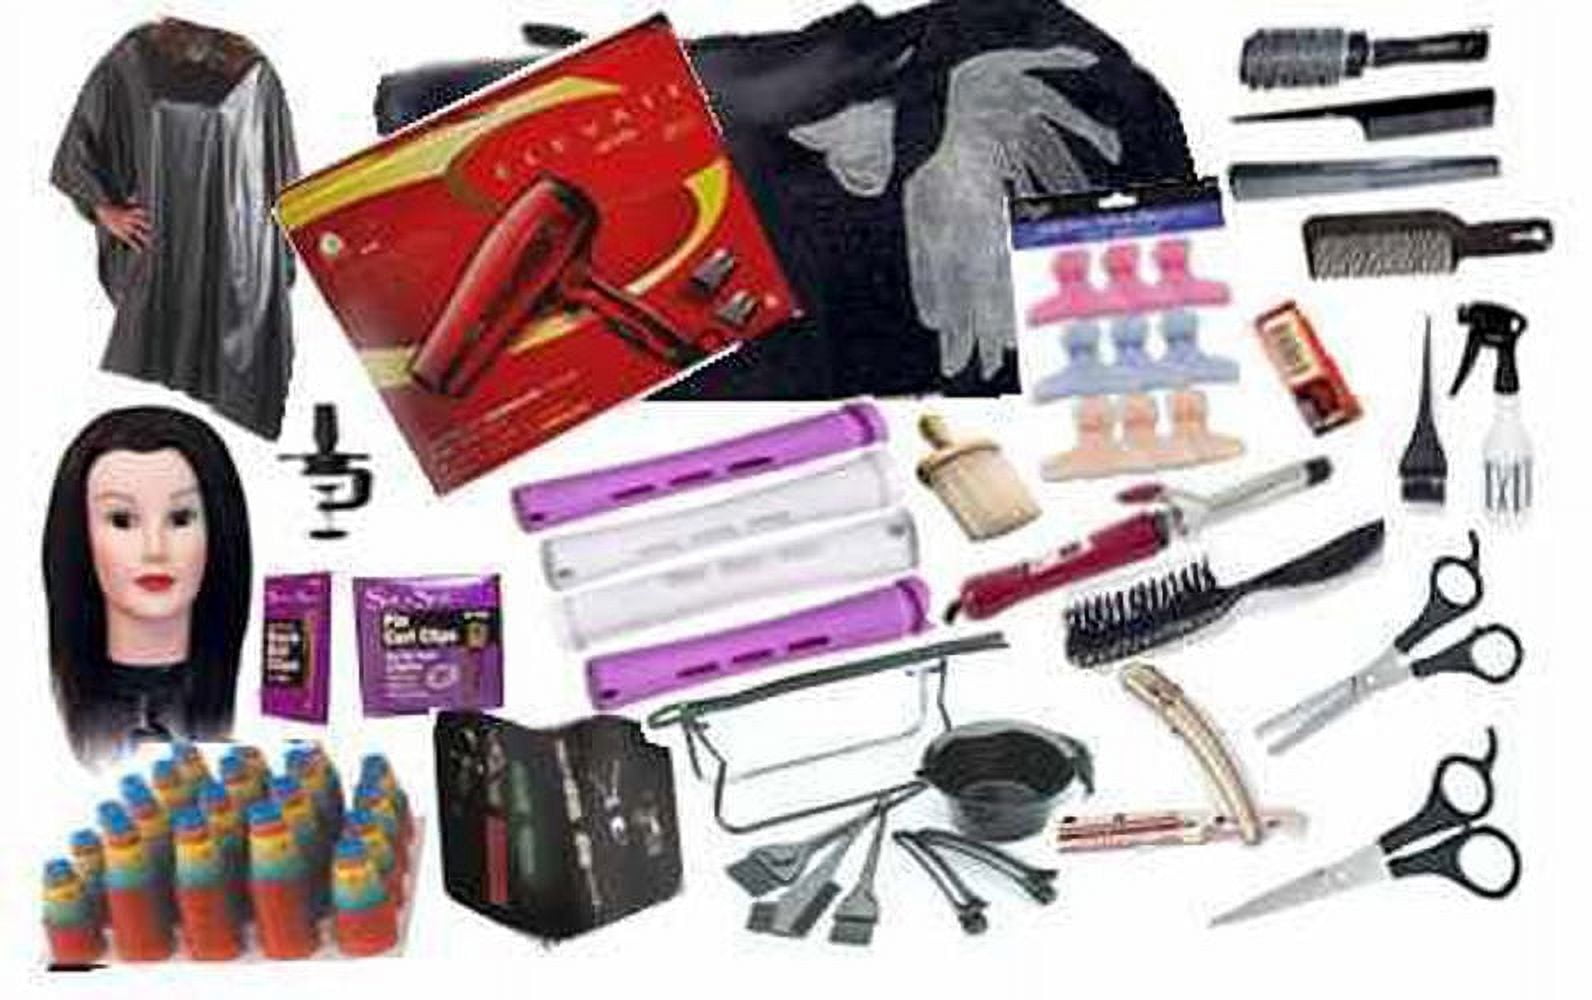 Mannequin Hand - Cosmetology Test Kits